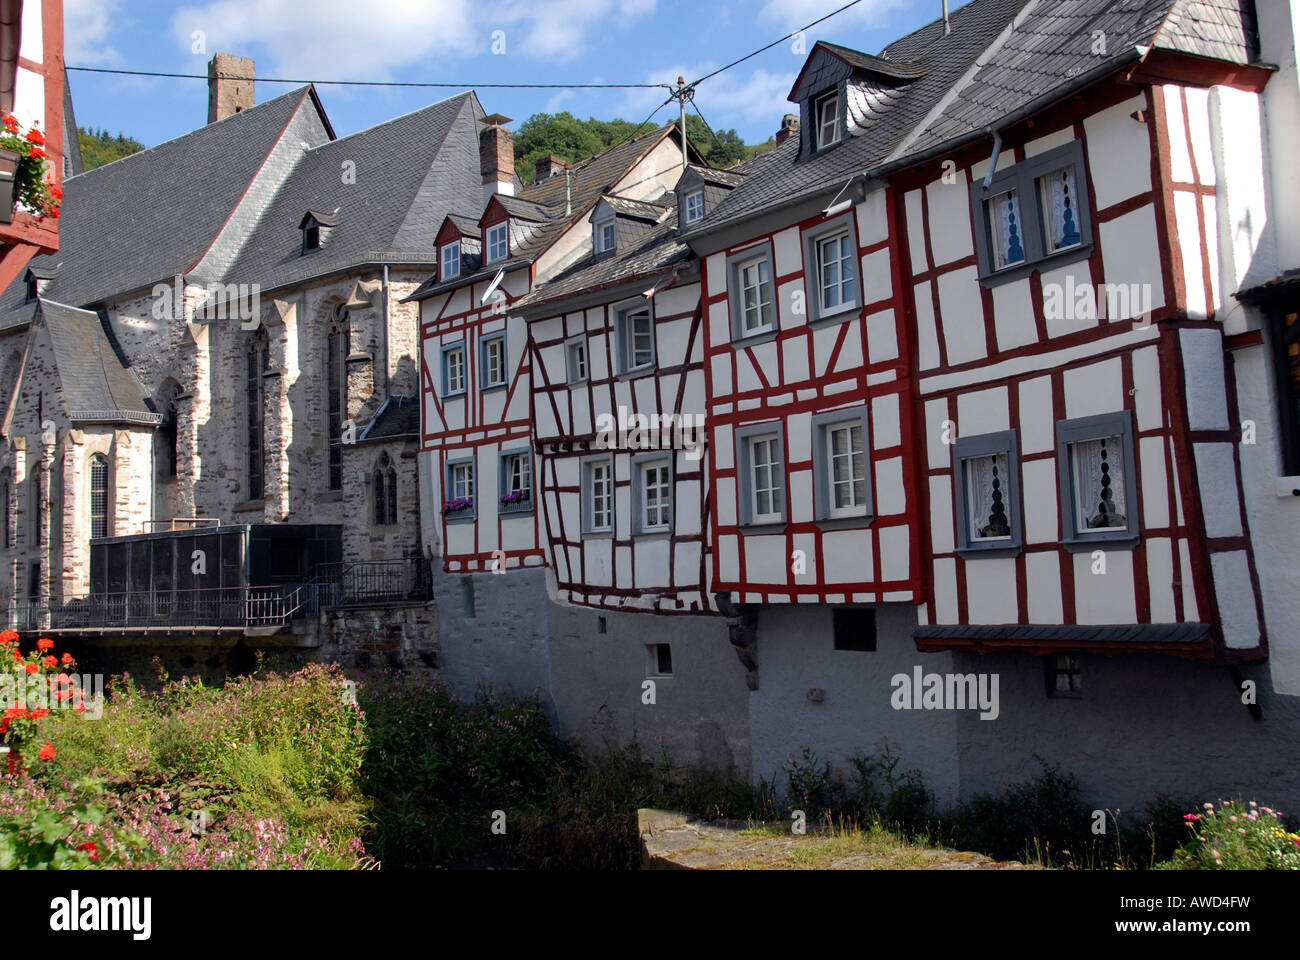 Town of Monreal, winner of the 'Unser Dorf hat Zukunft' (Our Town Has a Future) national contest in 2004, Monreal, Rhineland-Pa Stock Photo